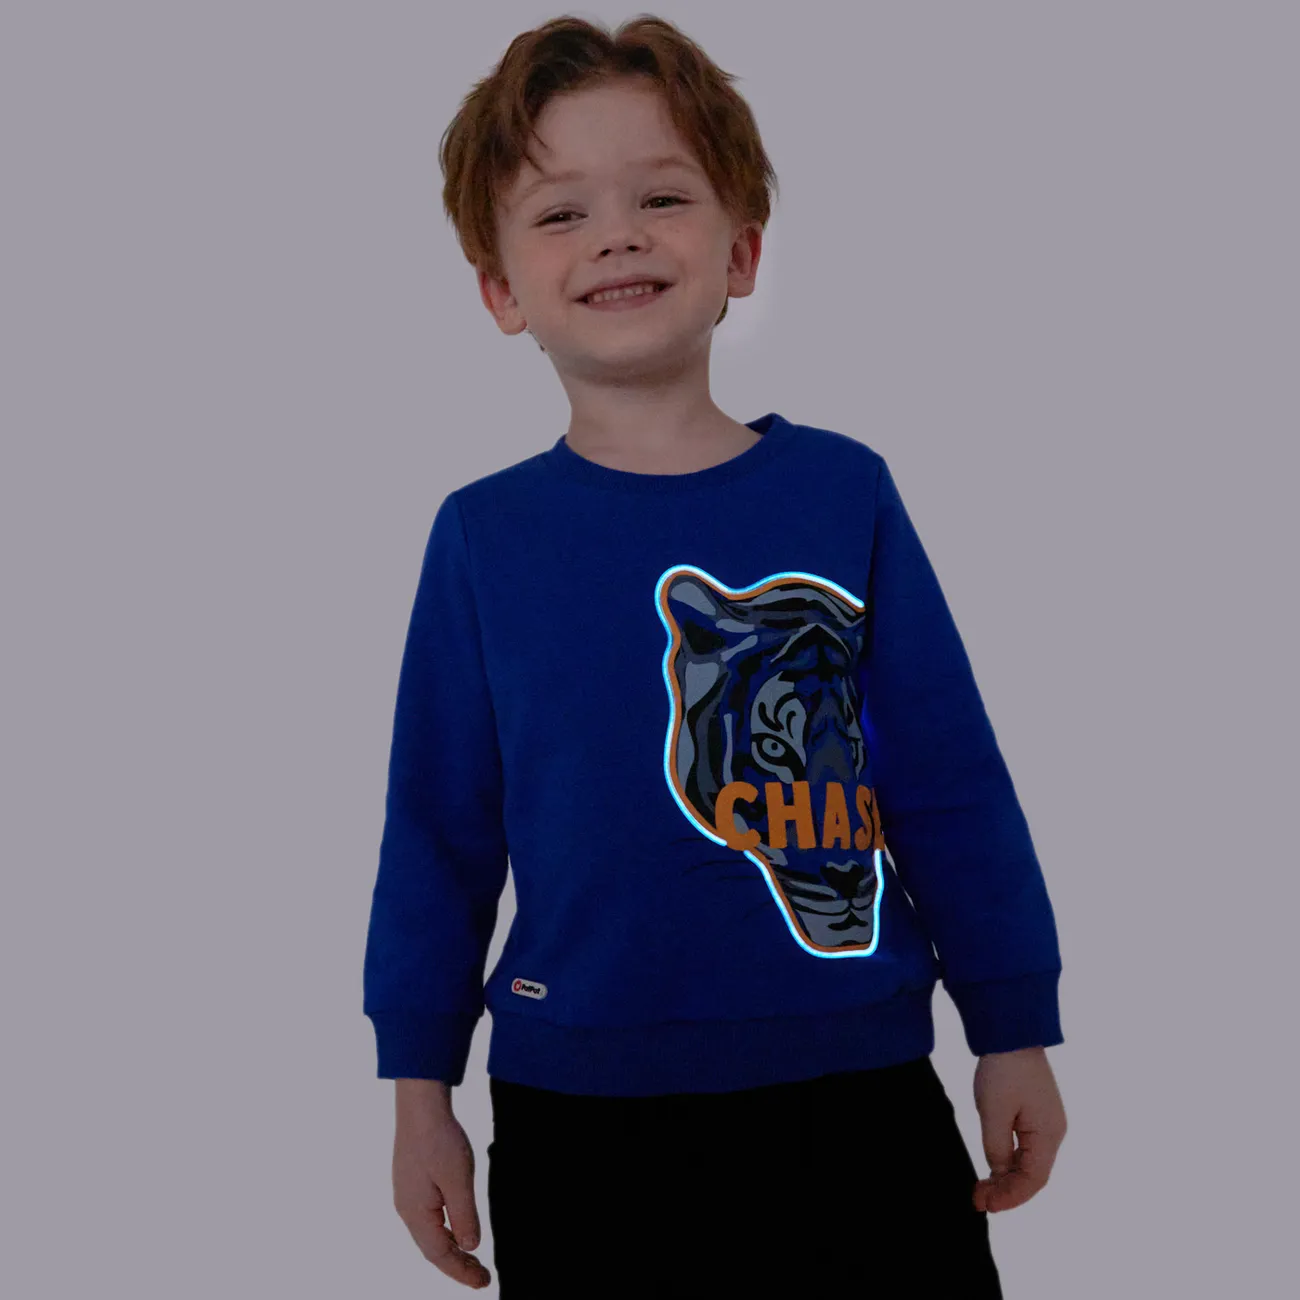 Go-Glow Illuminating Sweatshirt with Light Up Tiger Pattern Including Controller (Built-In Battery) Blue big image 1